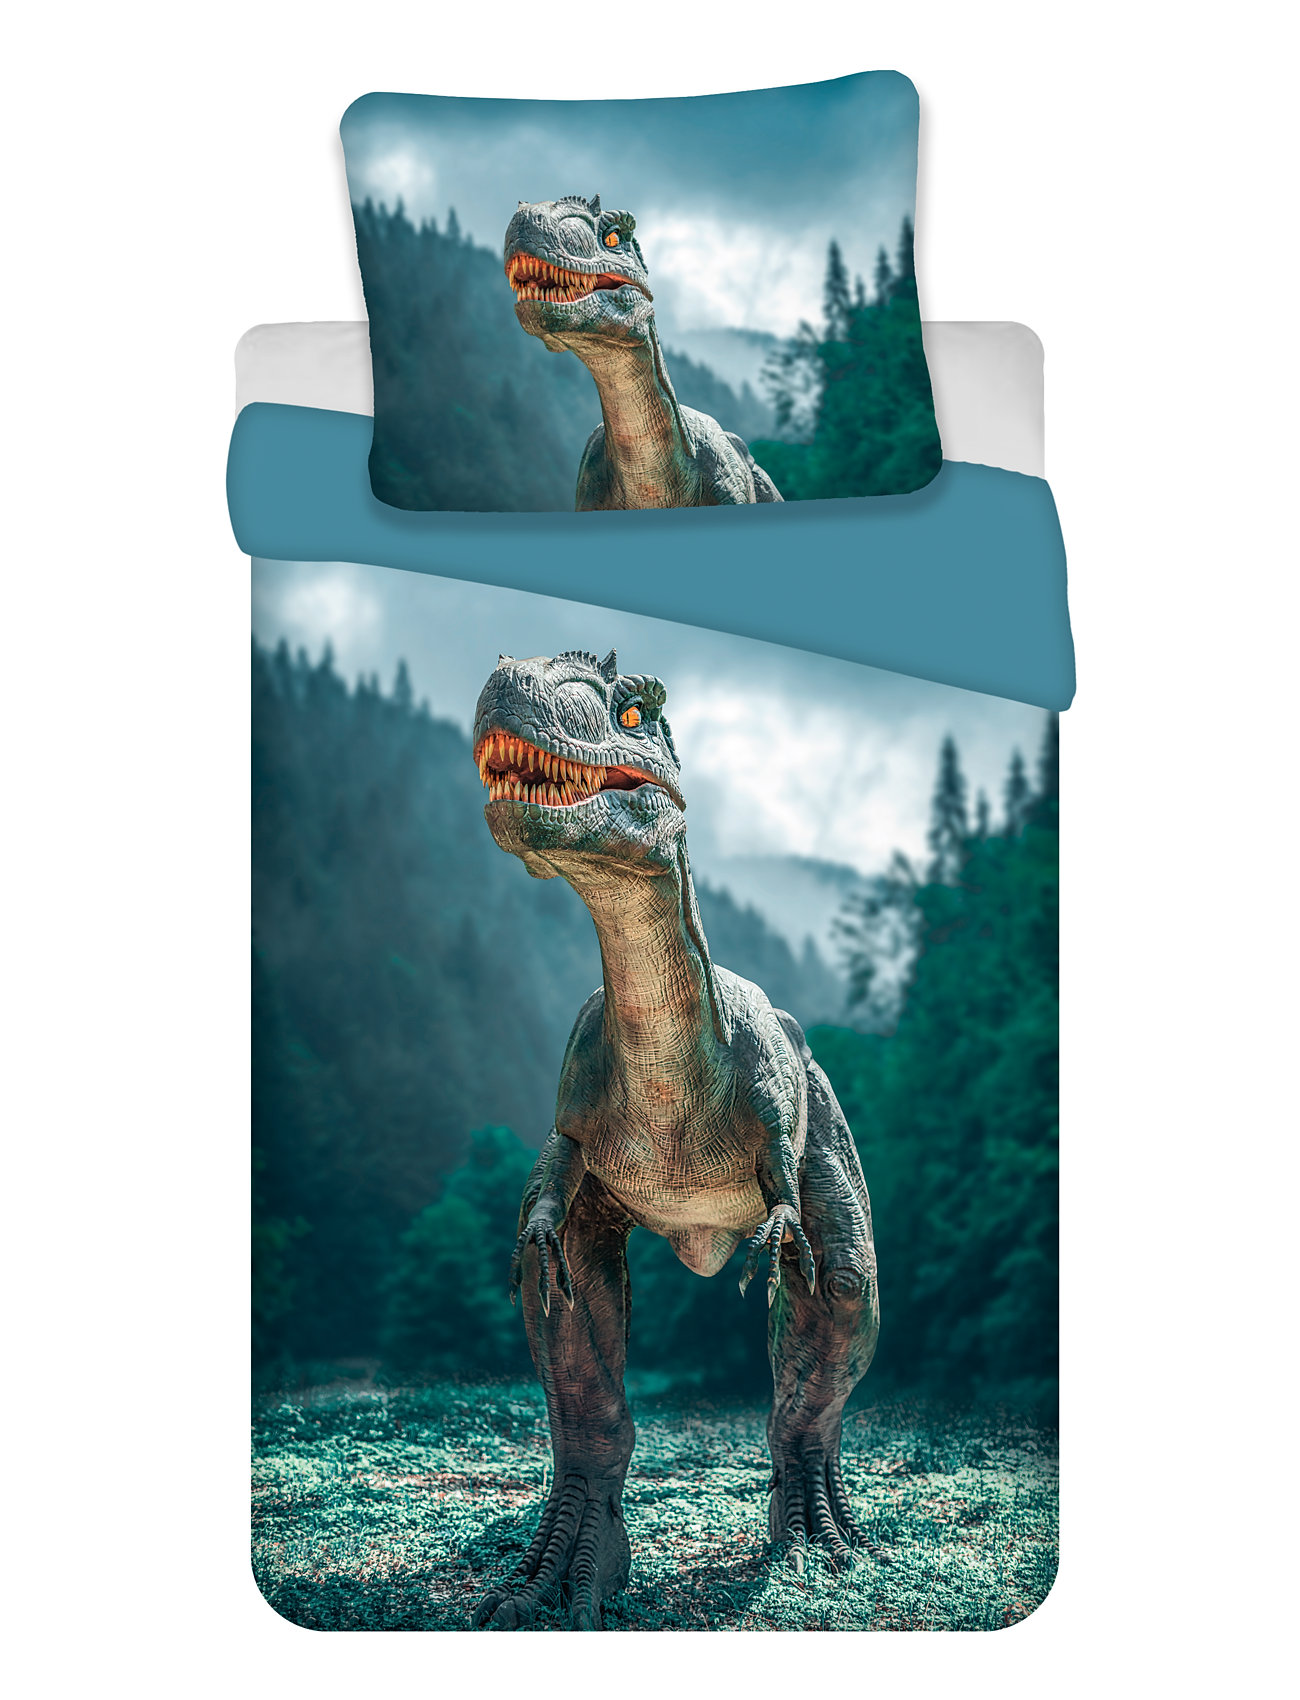 Bed Linen Nb 2314 Dino Blue - 140X200, 60X63 Cm Home Sleep Time Bed Sets Multi/patterned BrandMac